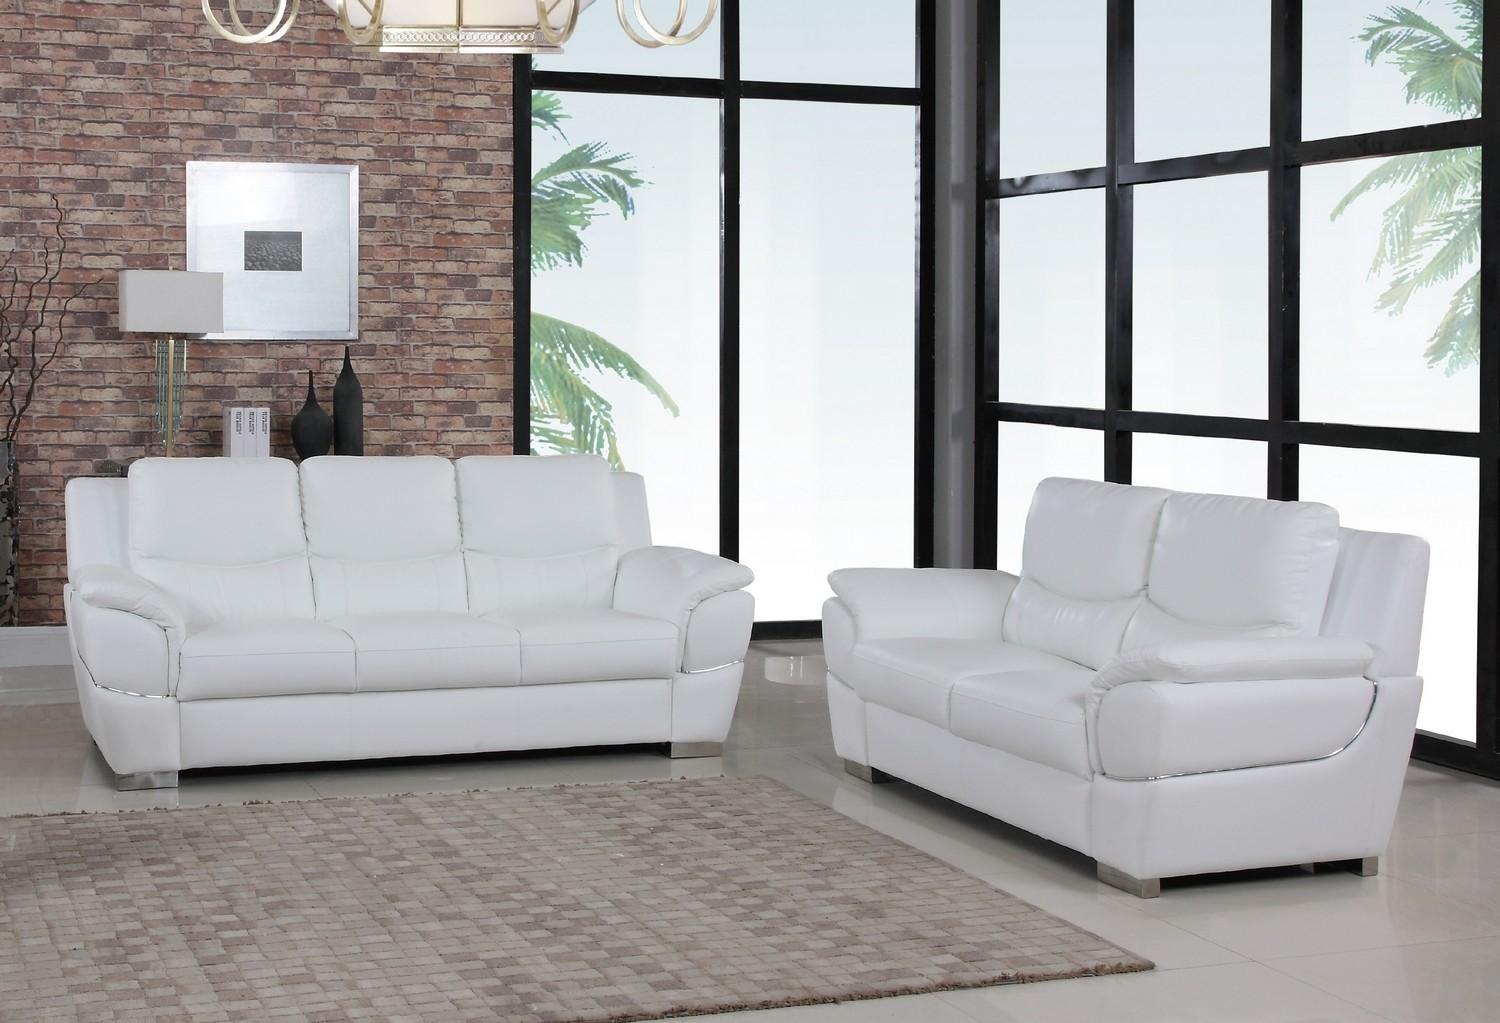 Contemporary Sofa and Loveseat Set 4572 4572-WHITE-2PC in White Leather gel match